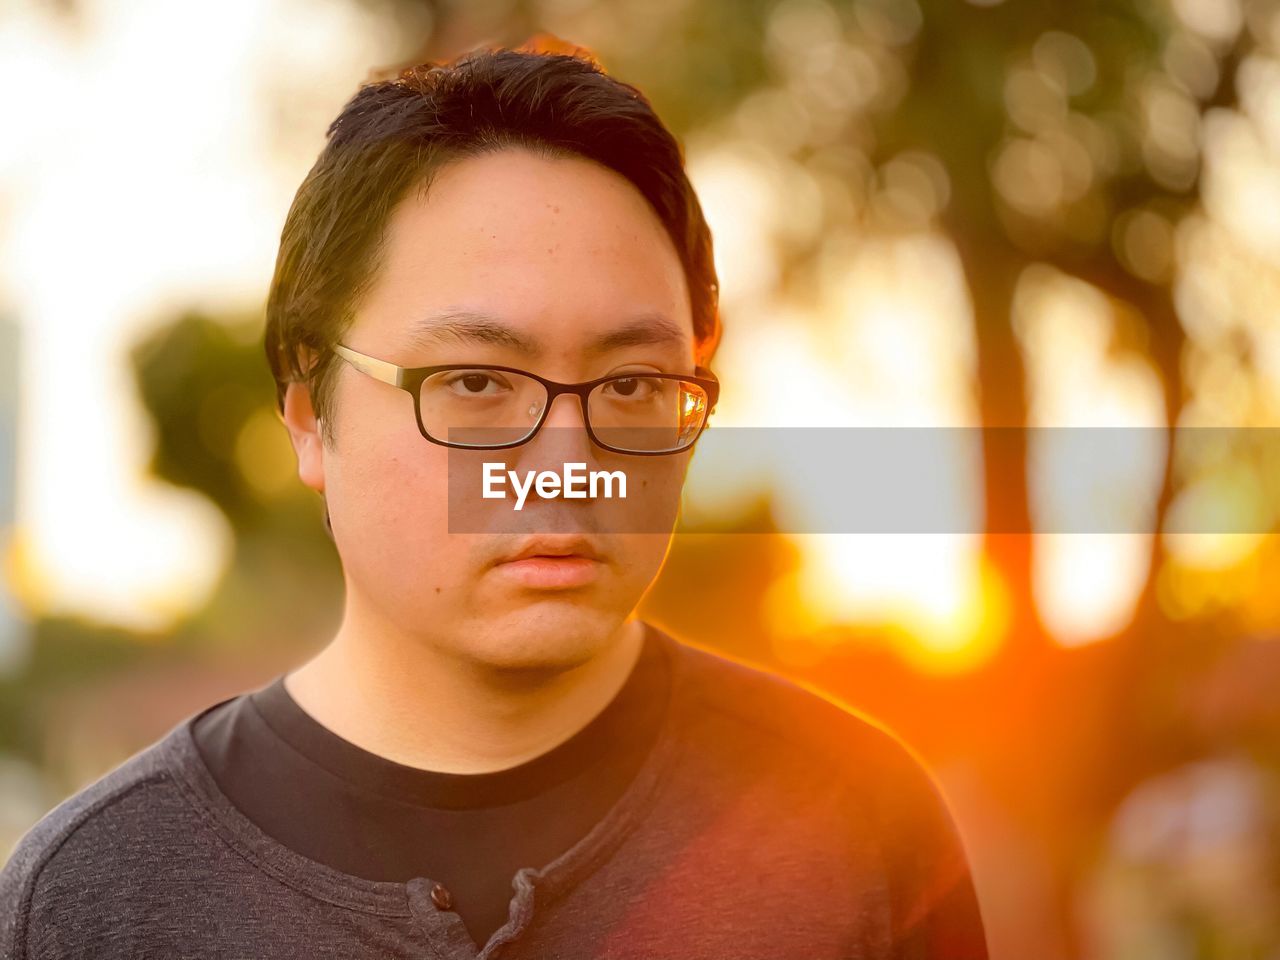 Portrait of young man wearing eyeglasses against trees and setting sun.